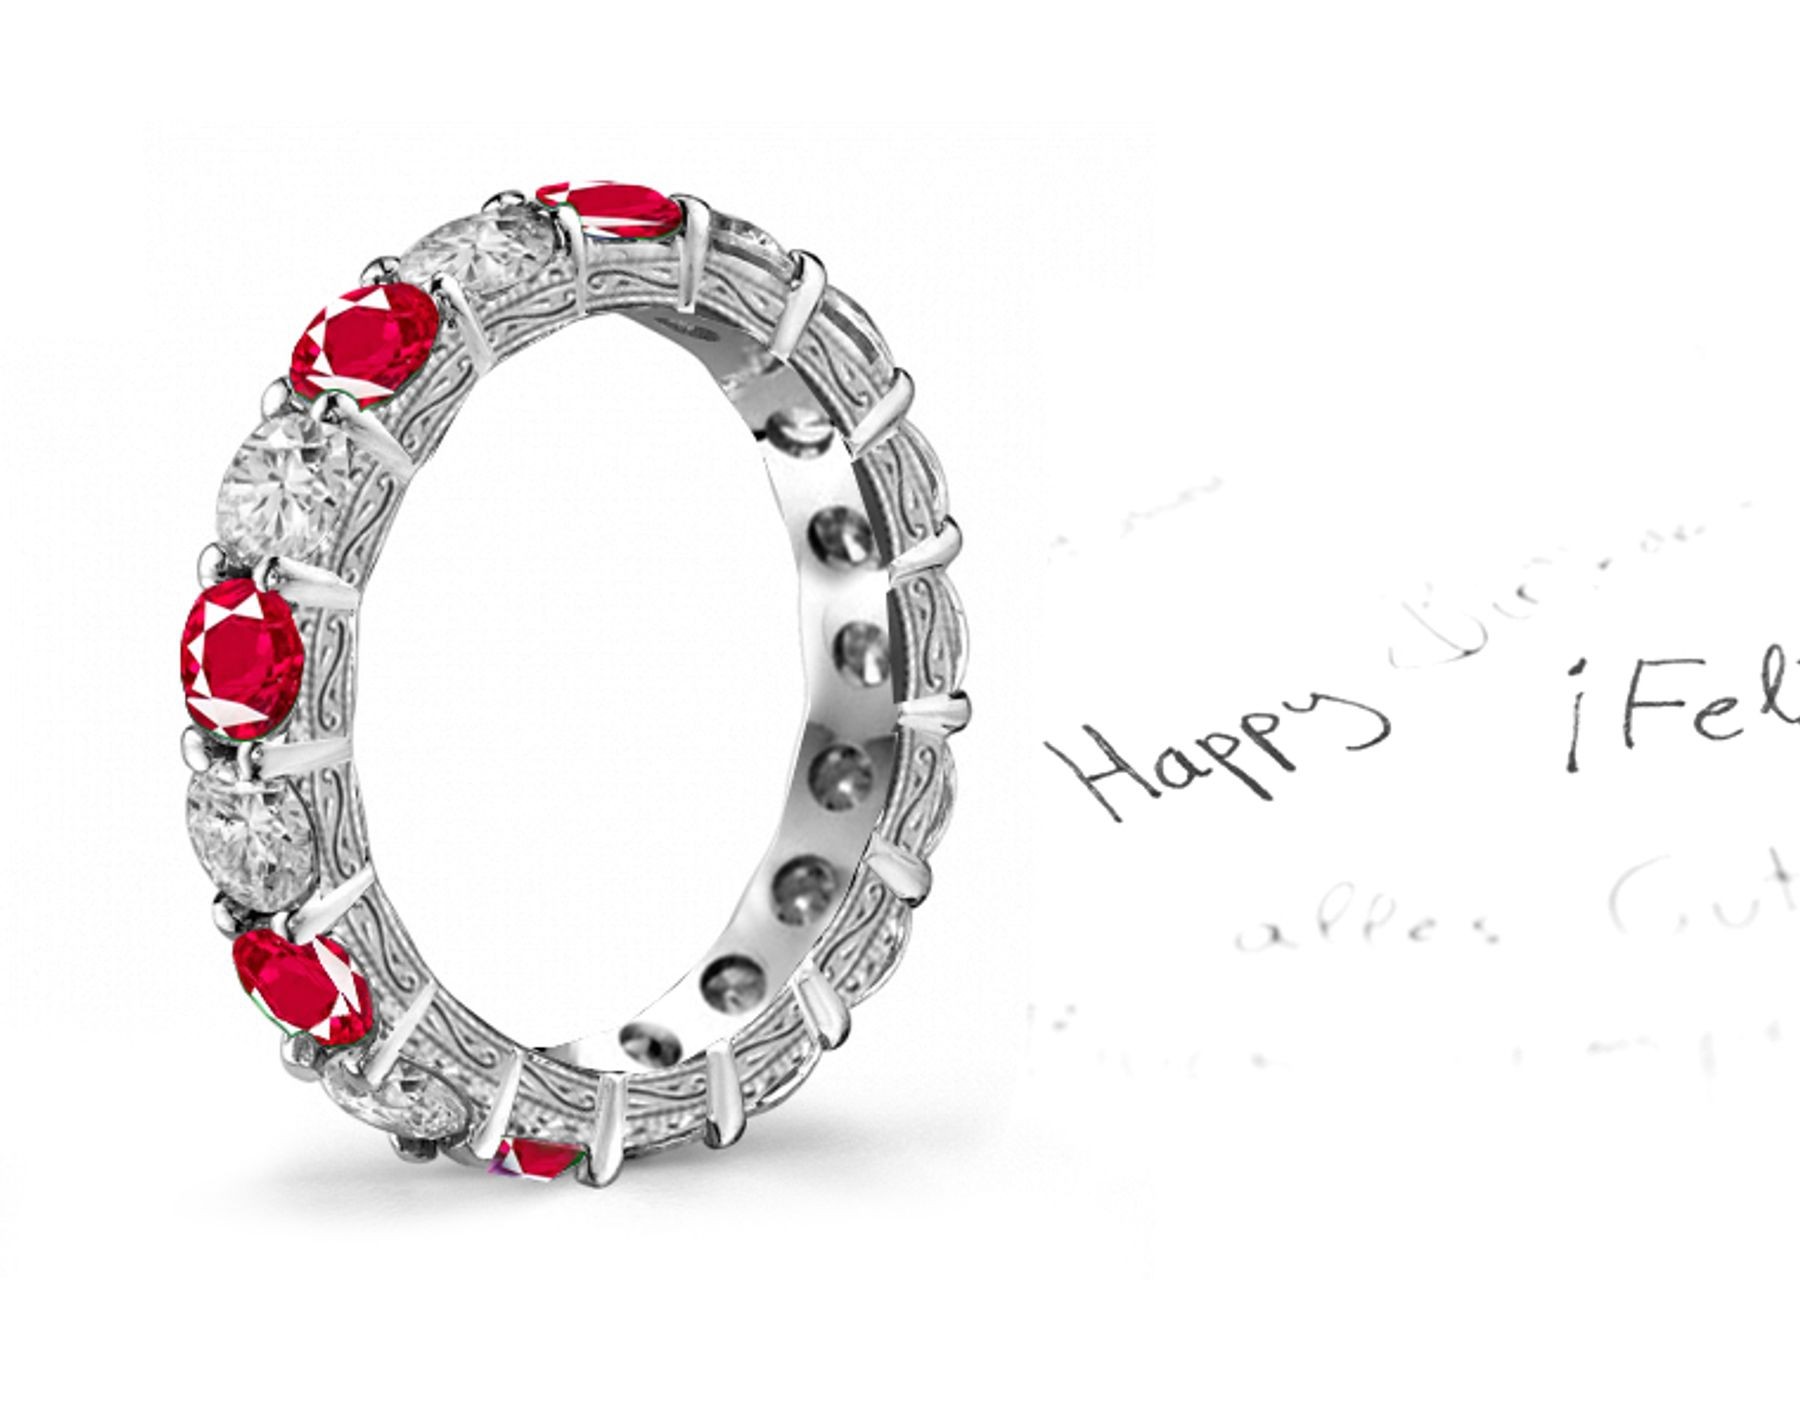 Hand Crafted Designer Ruby & Diamond Ring with Engraved Prong Baskets